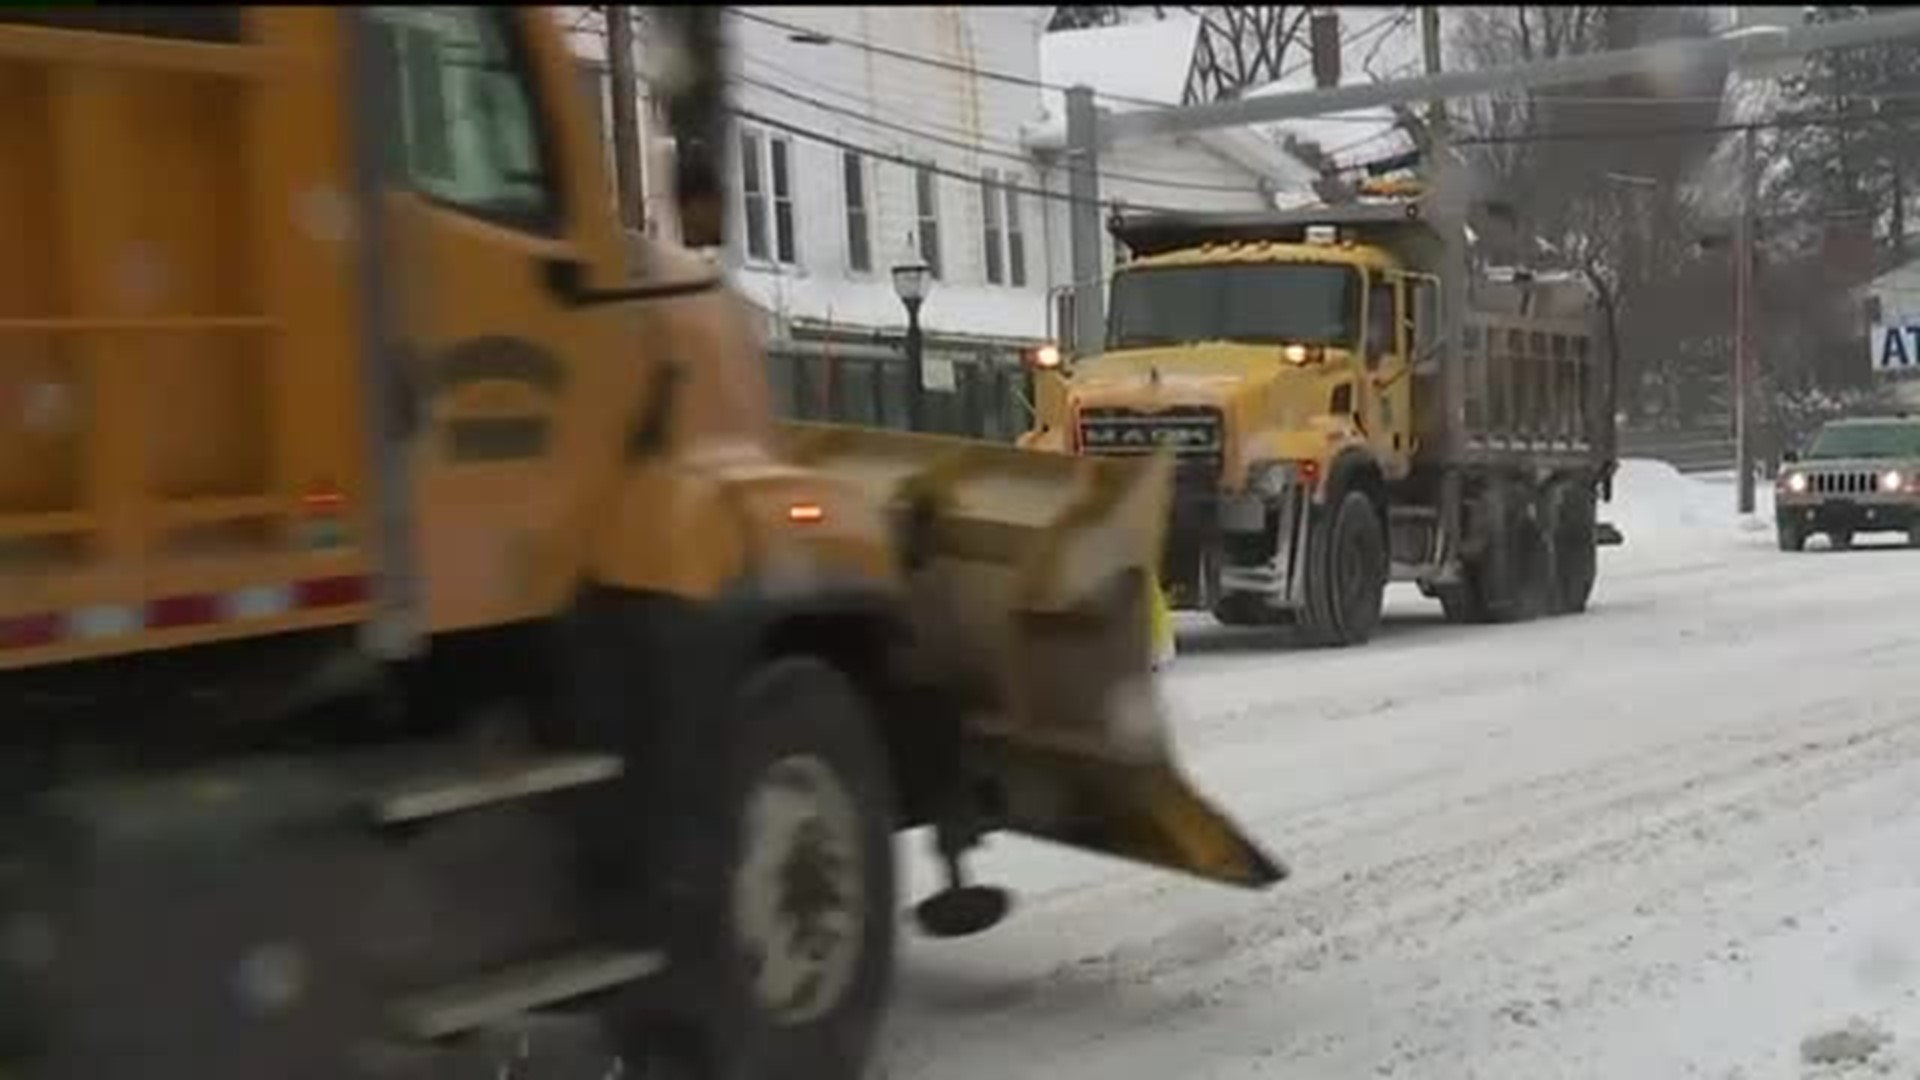 Folks Brave the Weather in Snowy Susquehanna County